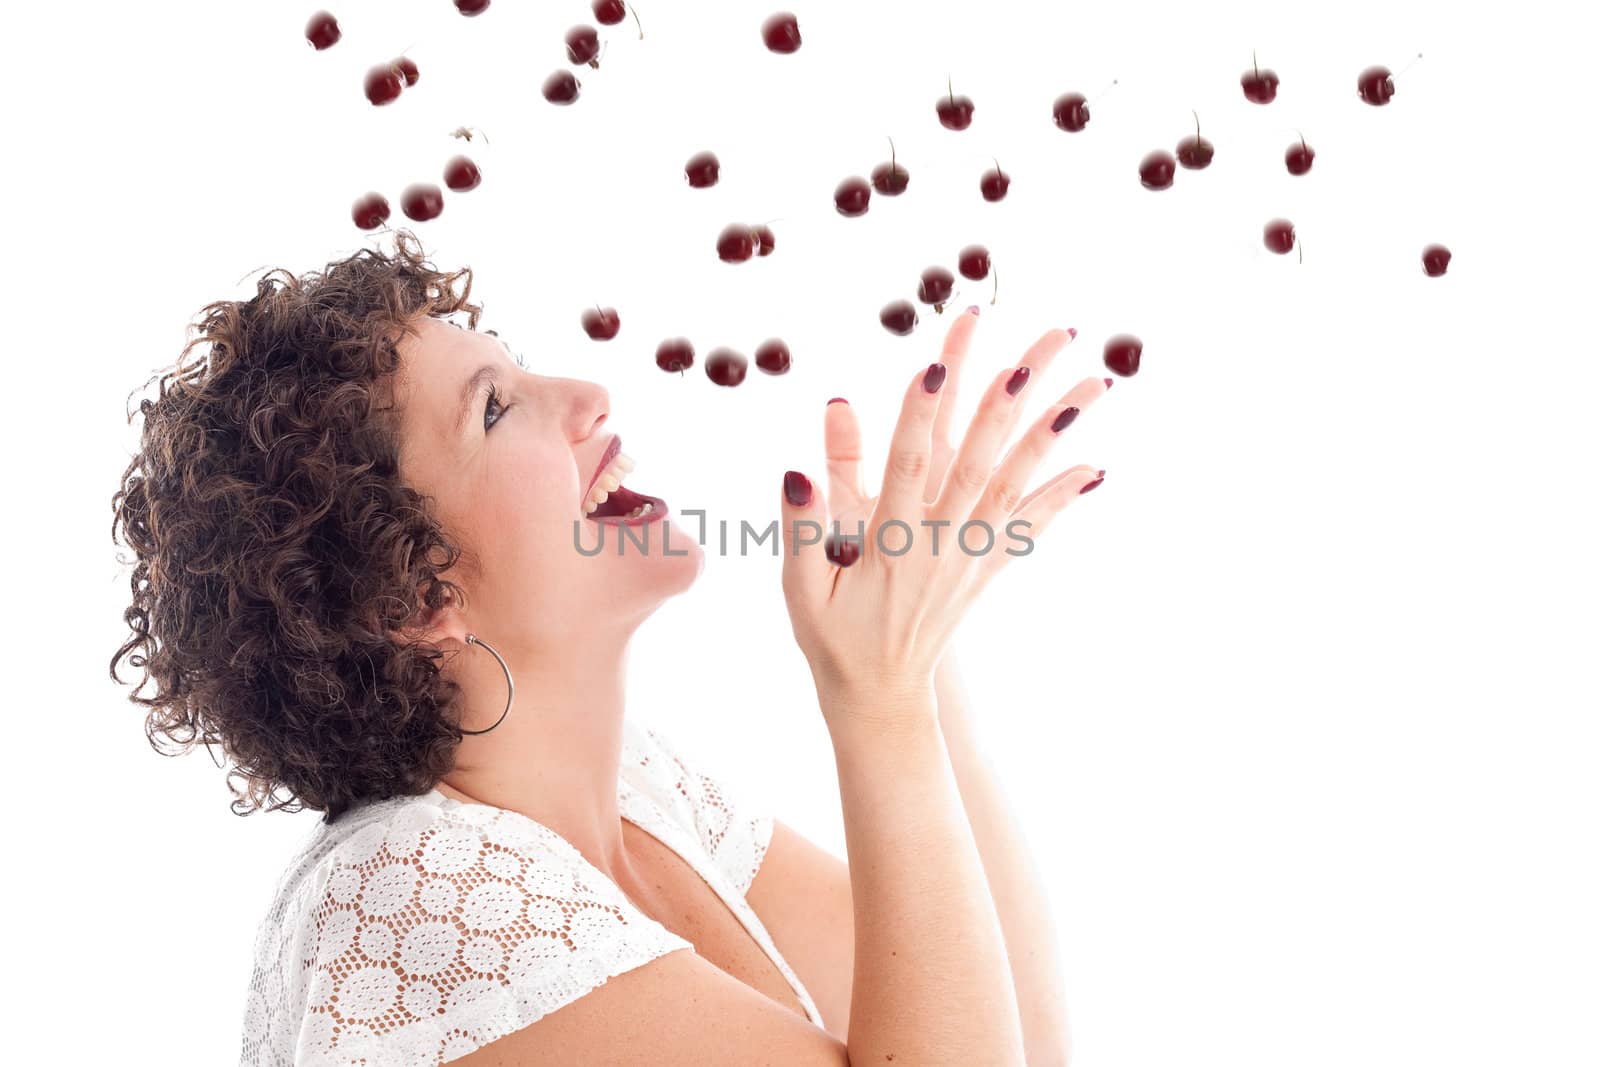 Catching the cherries by Fotosmurf